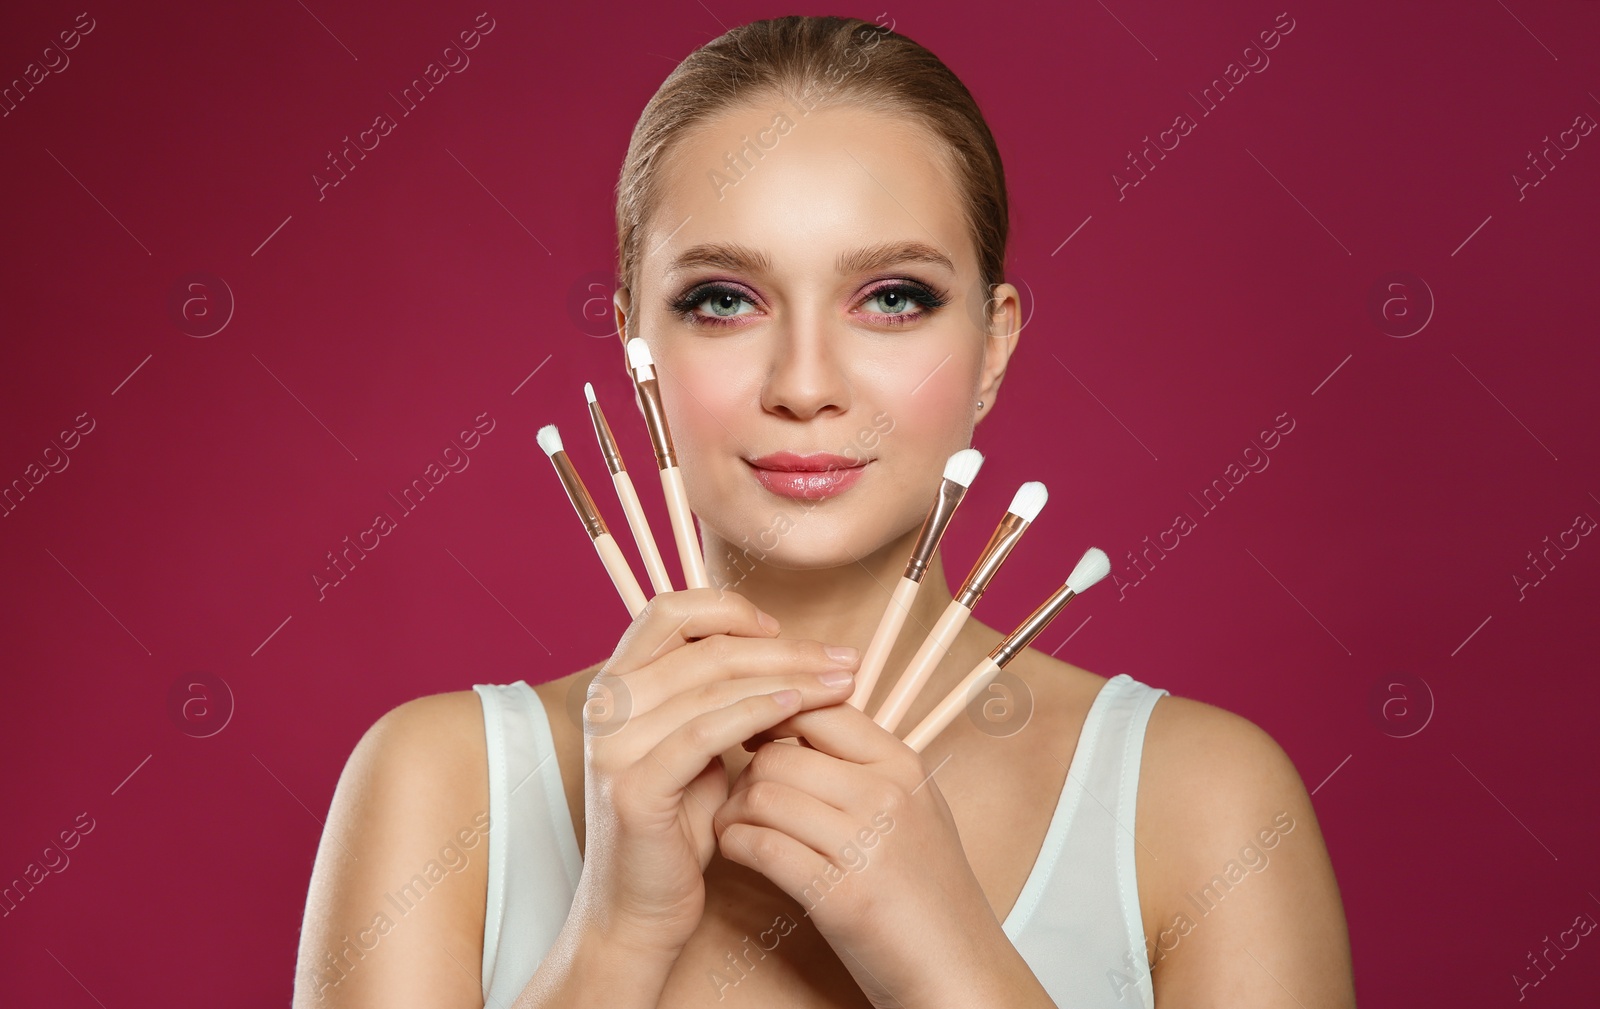 Photo of Beautiful woman with makeup brushes on pink background